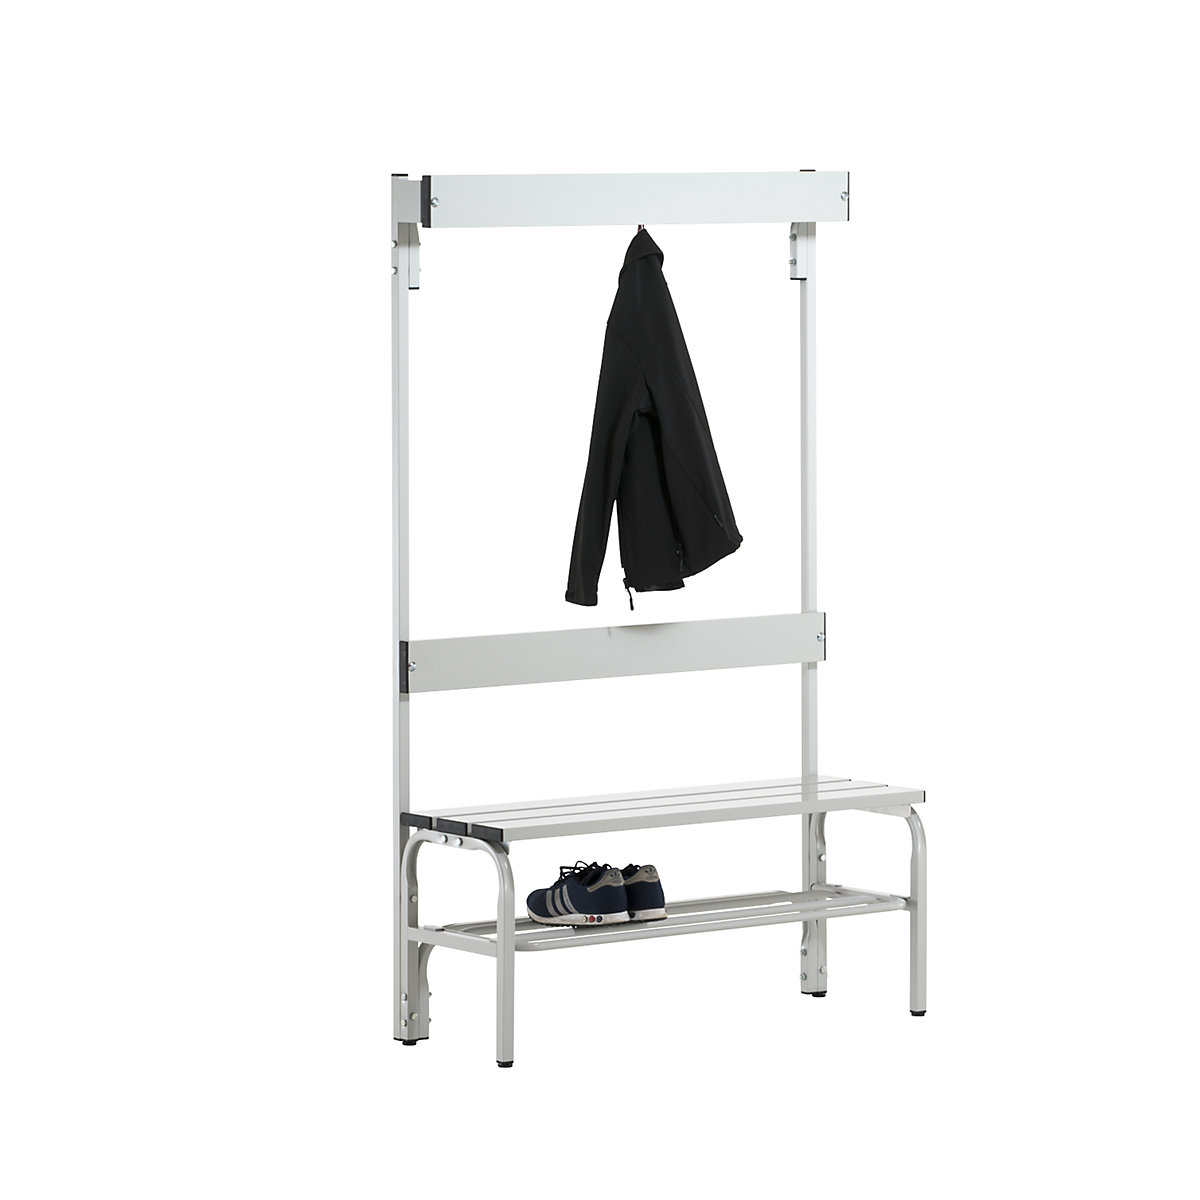 Sypro – Changing room bench made of stainless steel (Product illustration 13)